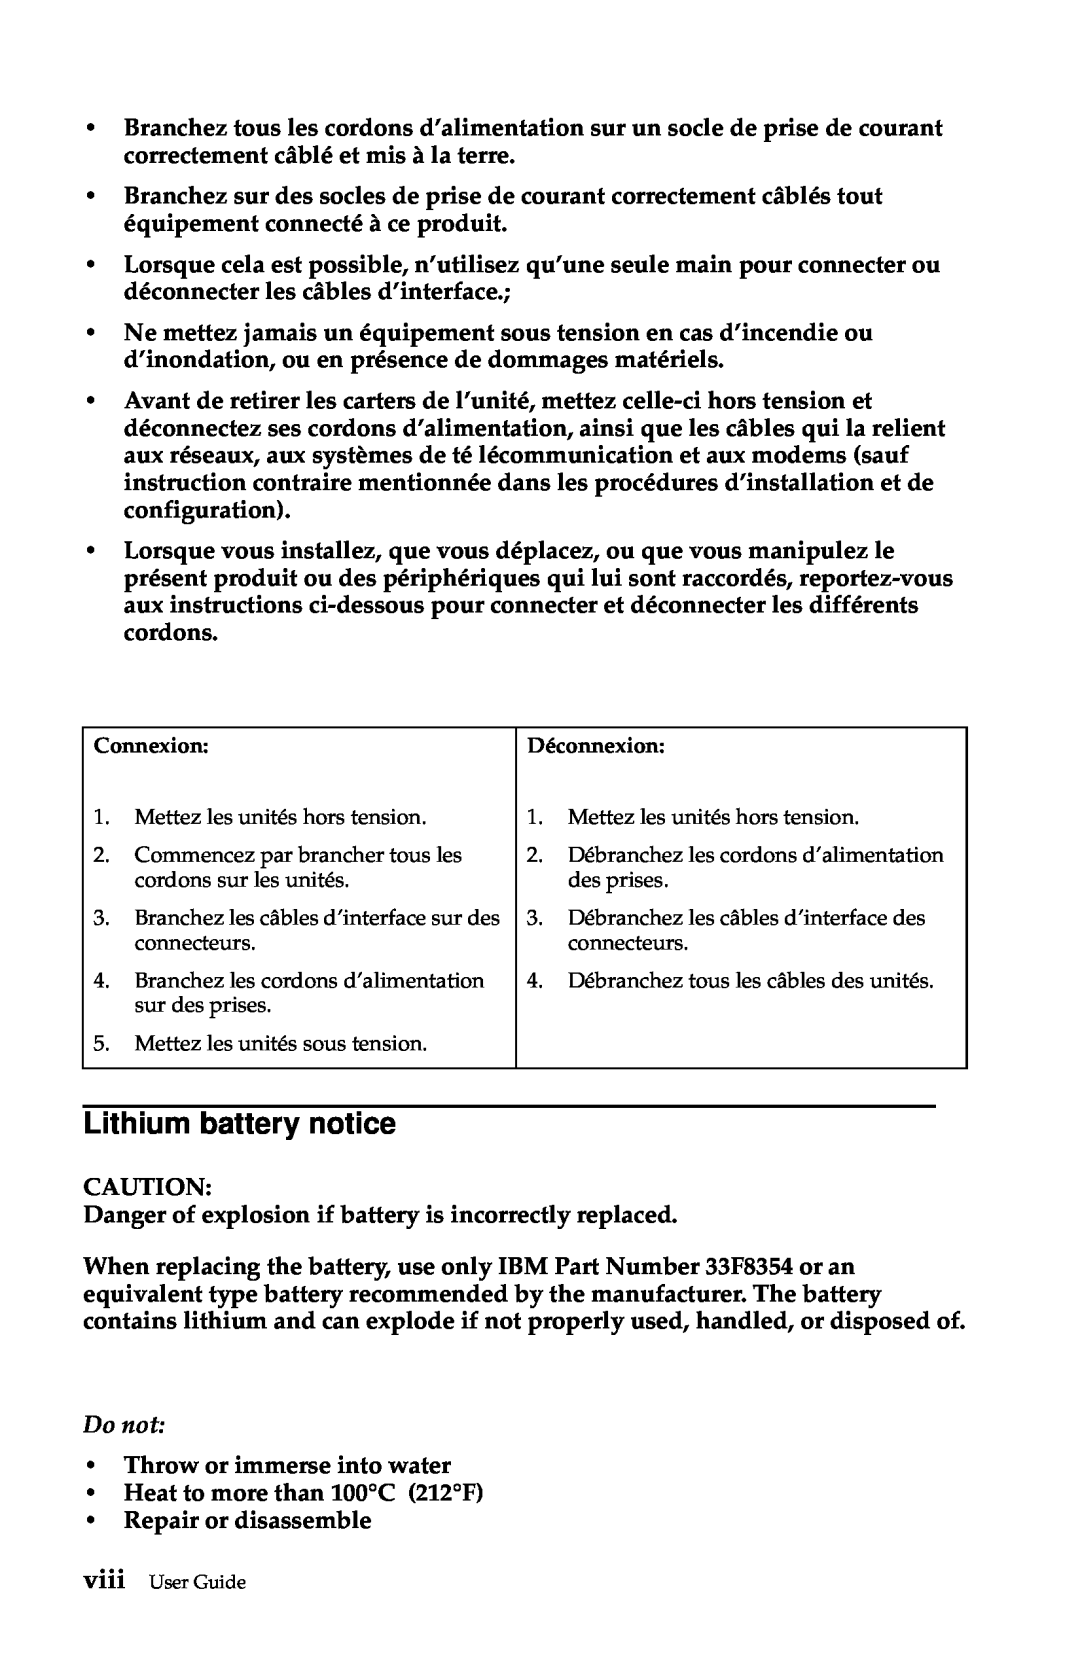 IBM 6274, 2283 manual Lithium battery notice, Do not 